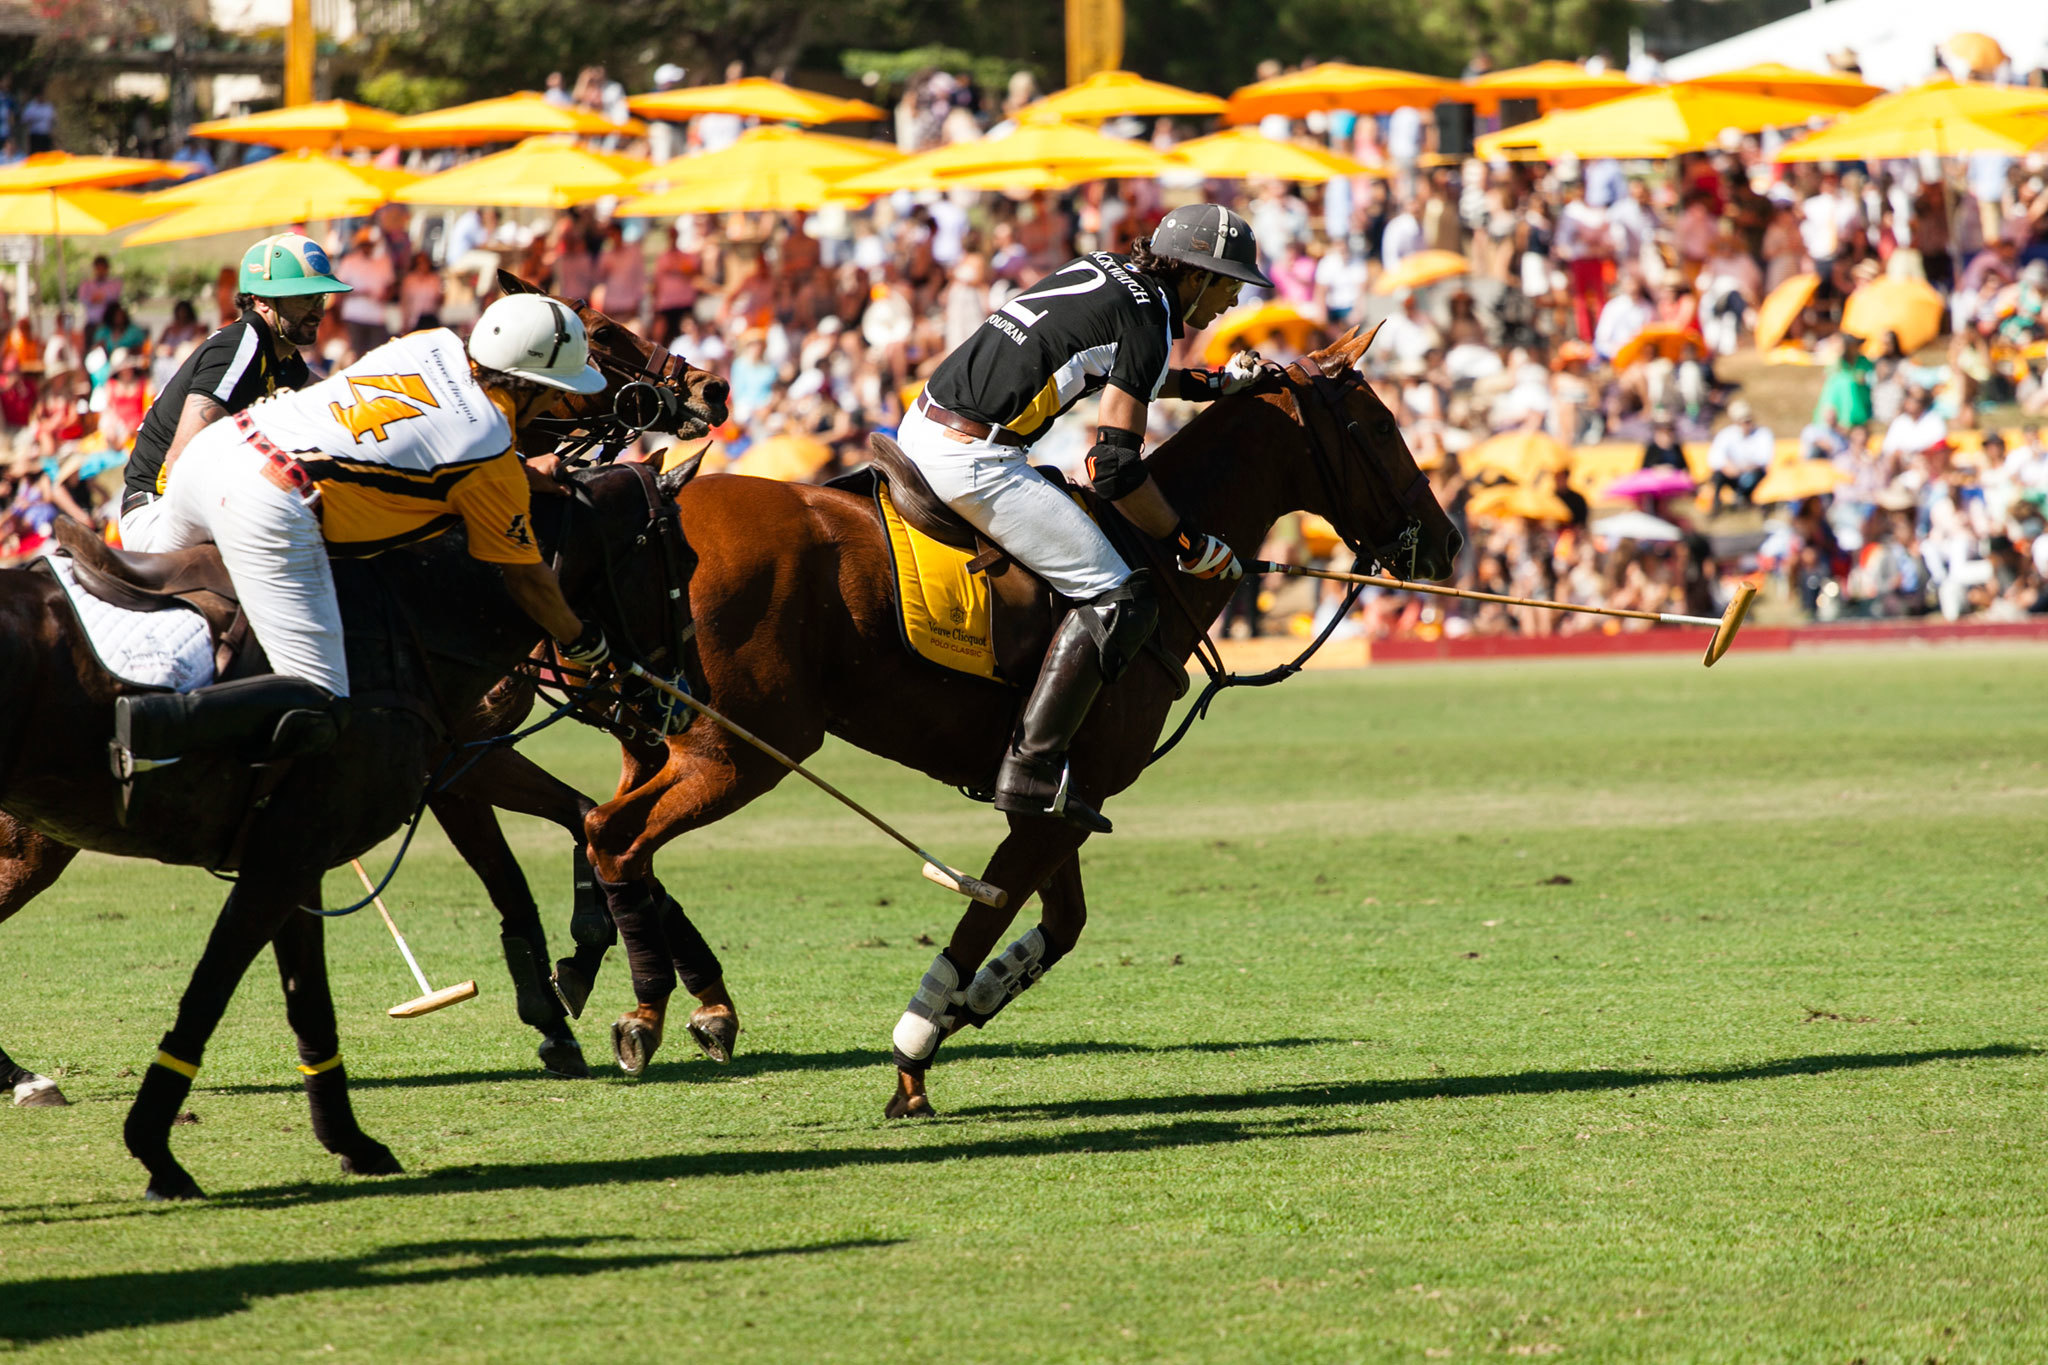 Veuve Clicquot Polo Classic Things to do in Los Angeles